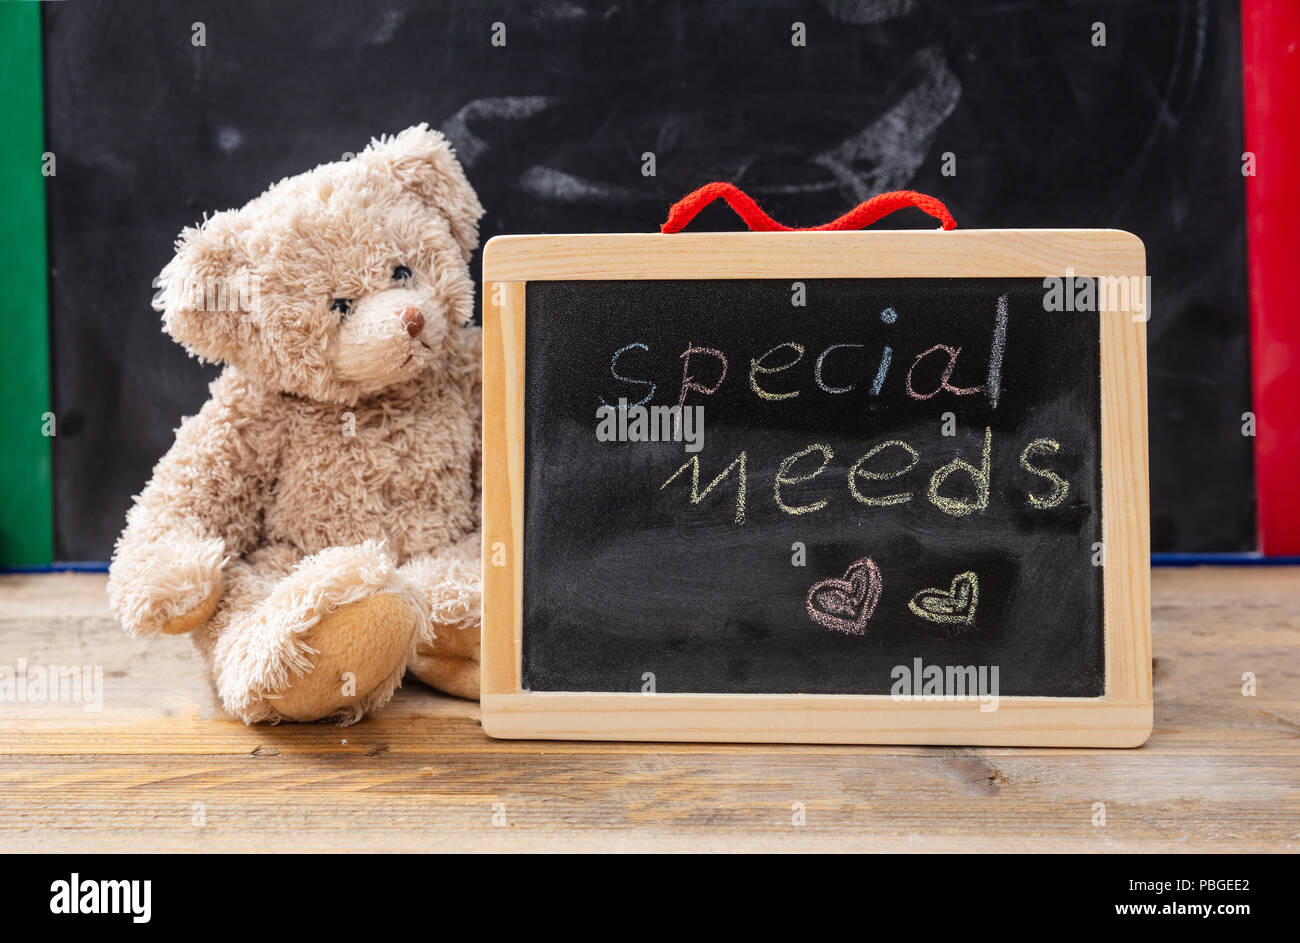 Special needs at school. Teddy bear hiding behind a blackboard. Special needs text drawing on the blackboard Stock Photo